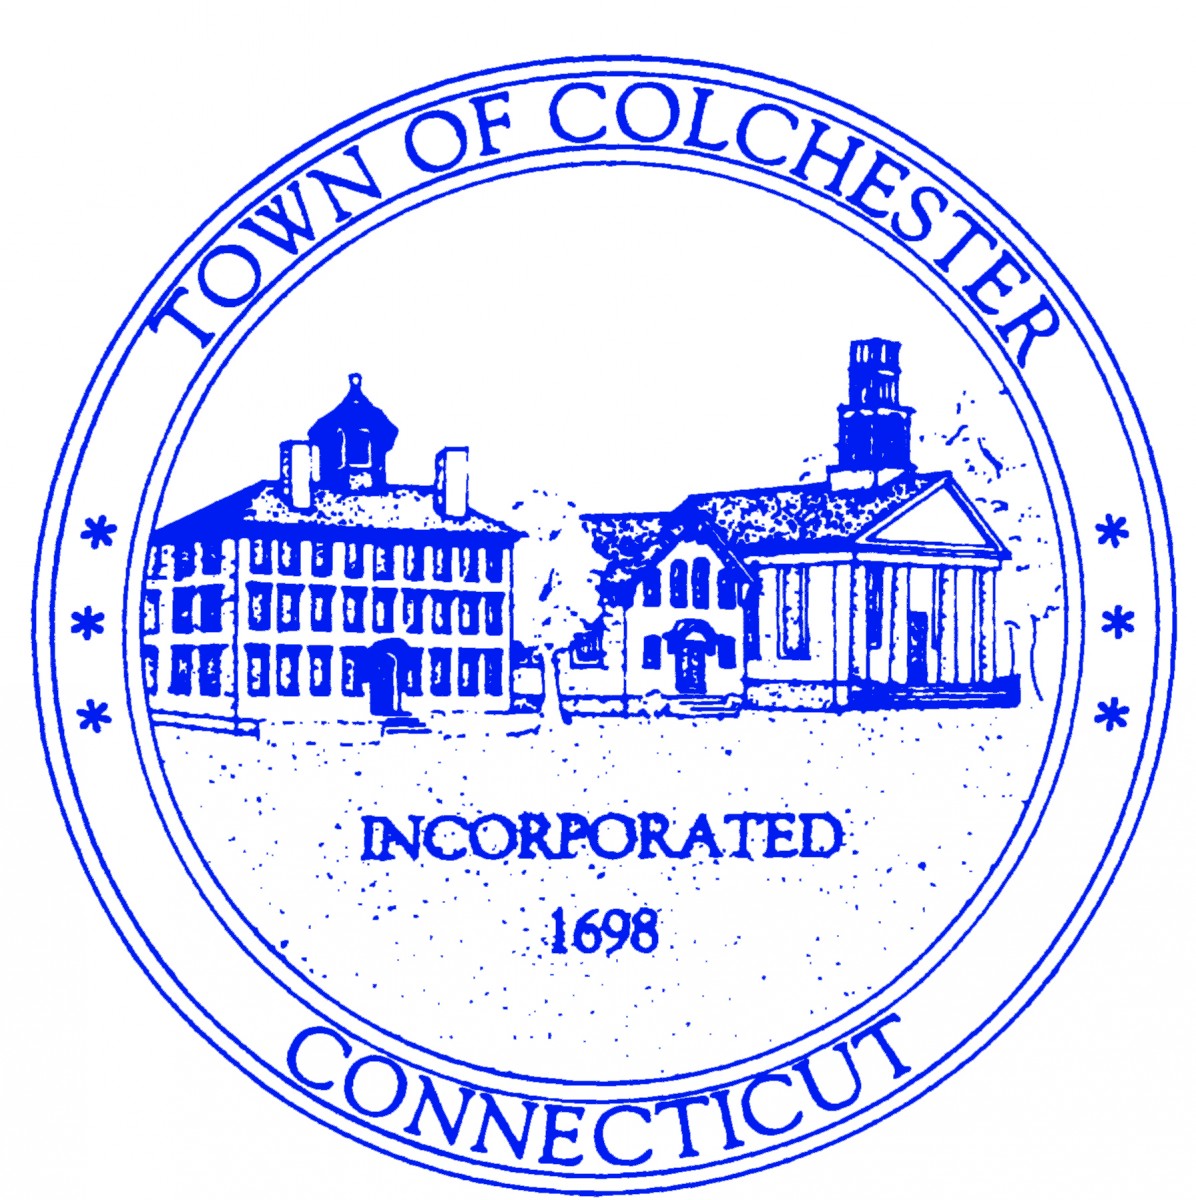 Air Conditioning in Colchester, CT